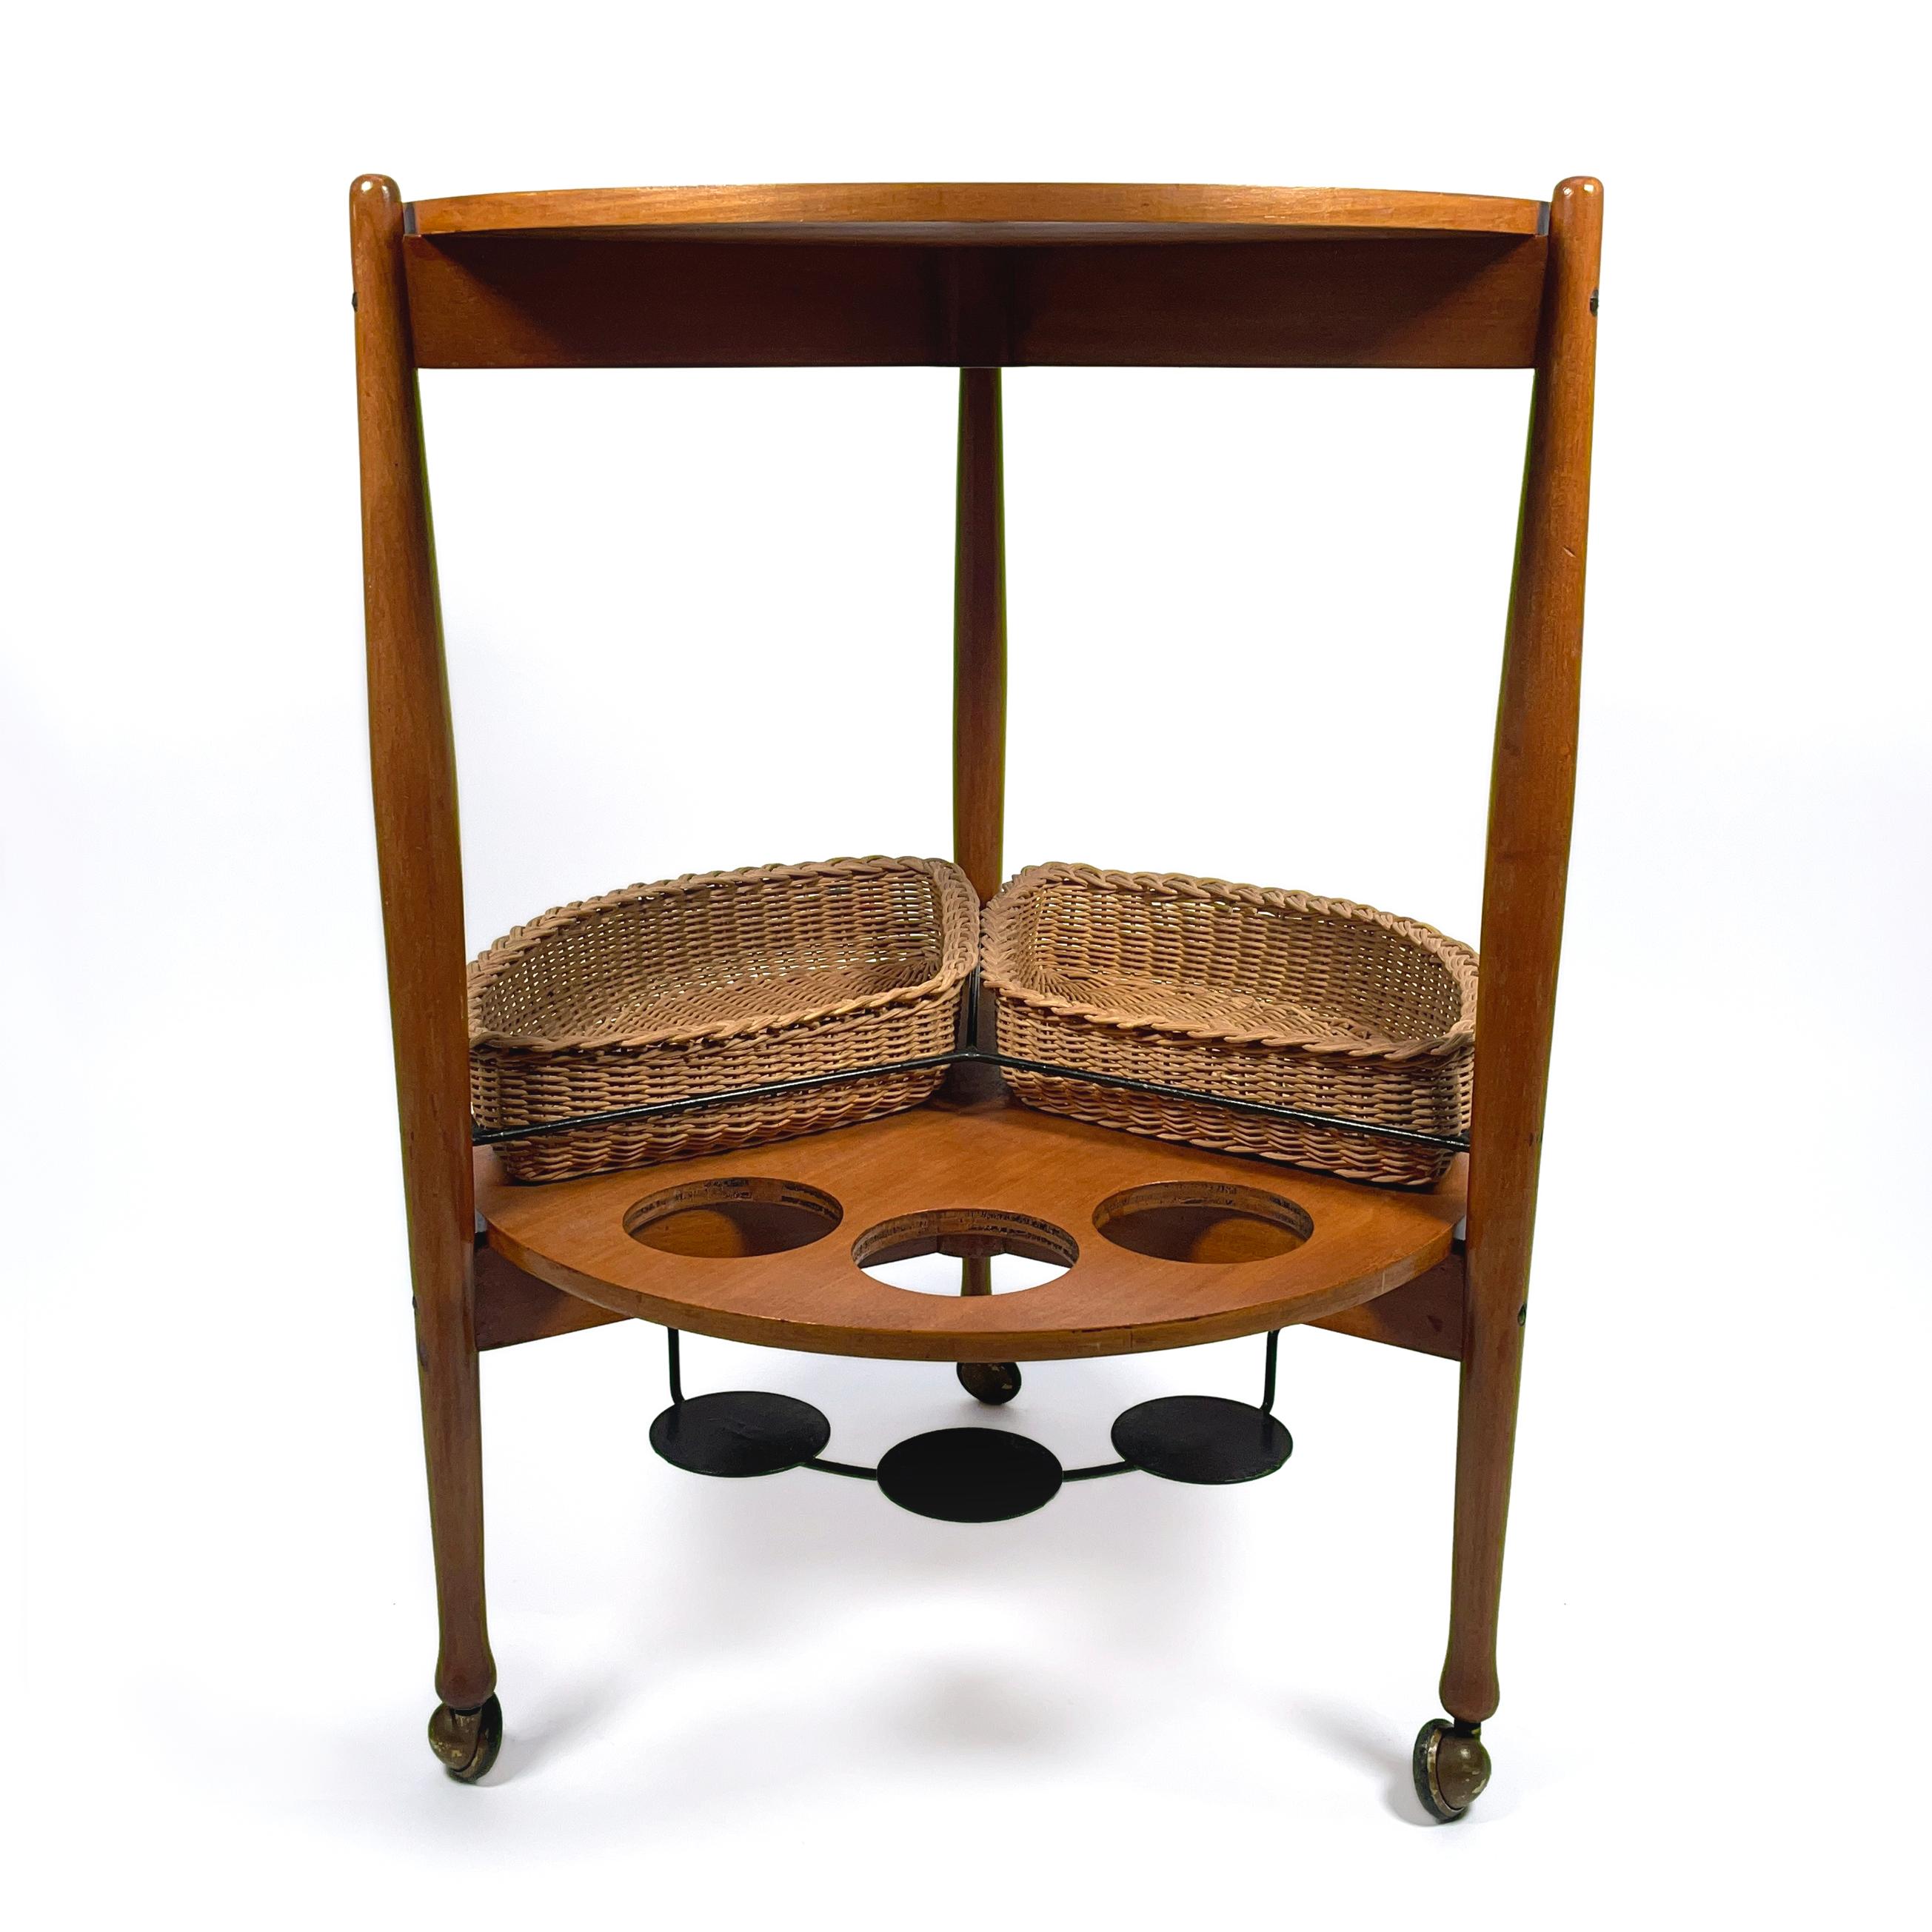 Very decorative and versatile vintage bar cart, serving trolley from the 1950s by Fratelli Reguitti.
The bar cart is made of solid wood (with iron and brass details), has 3 bottle holders and is fitted with two removable original wicker baskets.